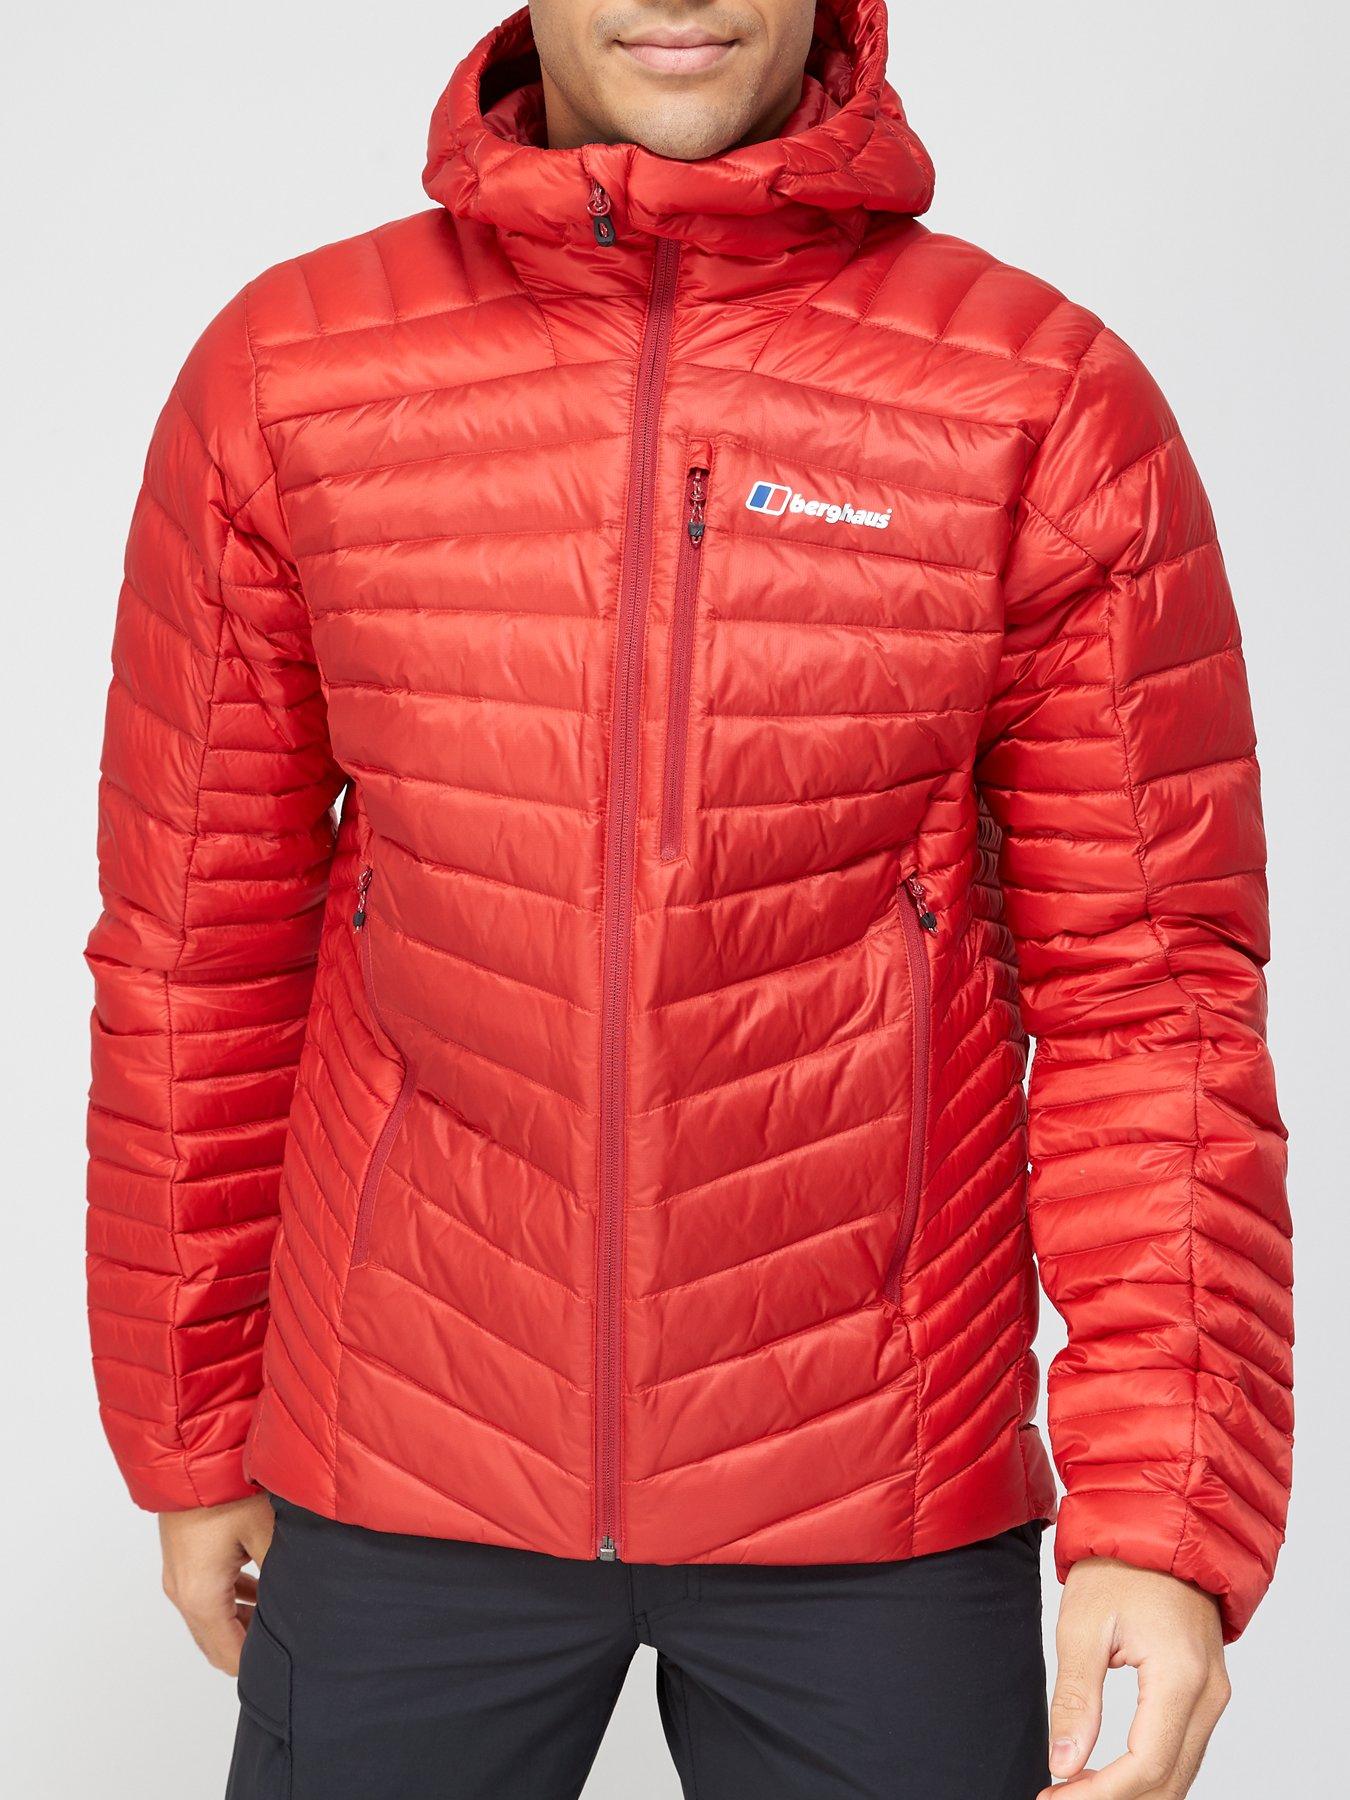 Men's Quilted \u0026 Padded Jackets 